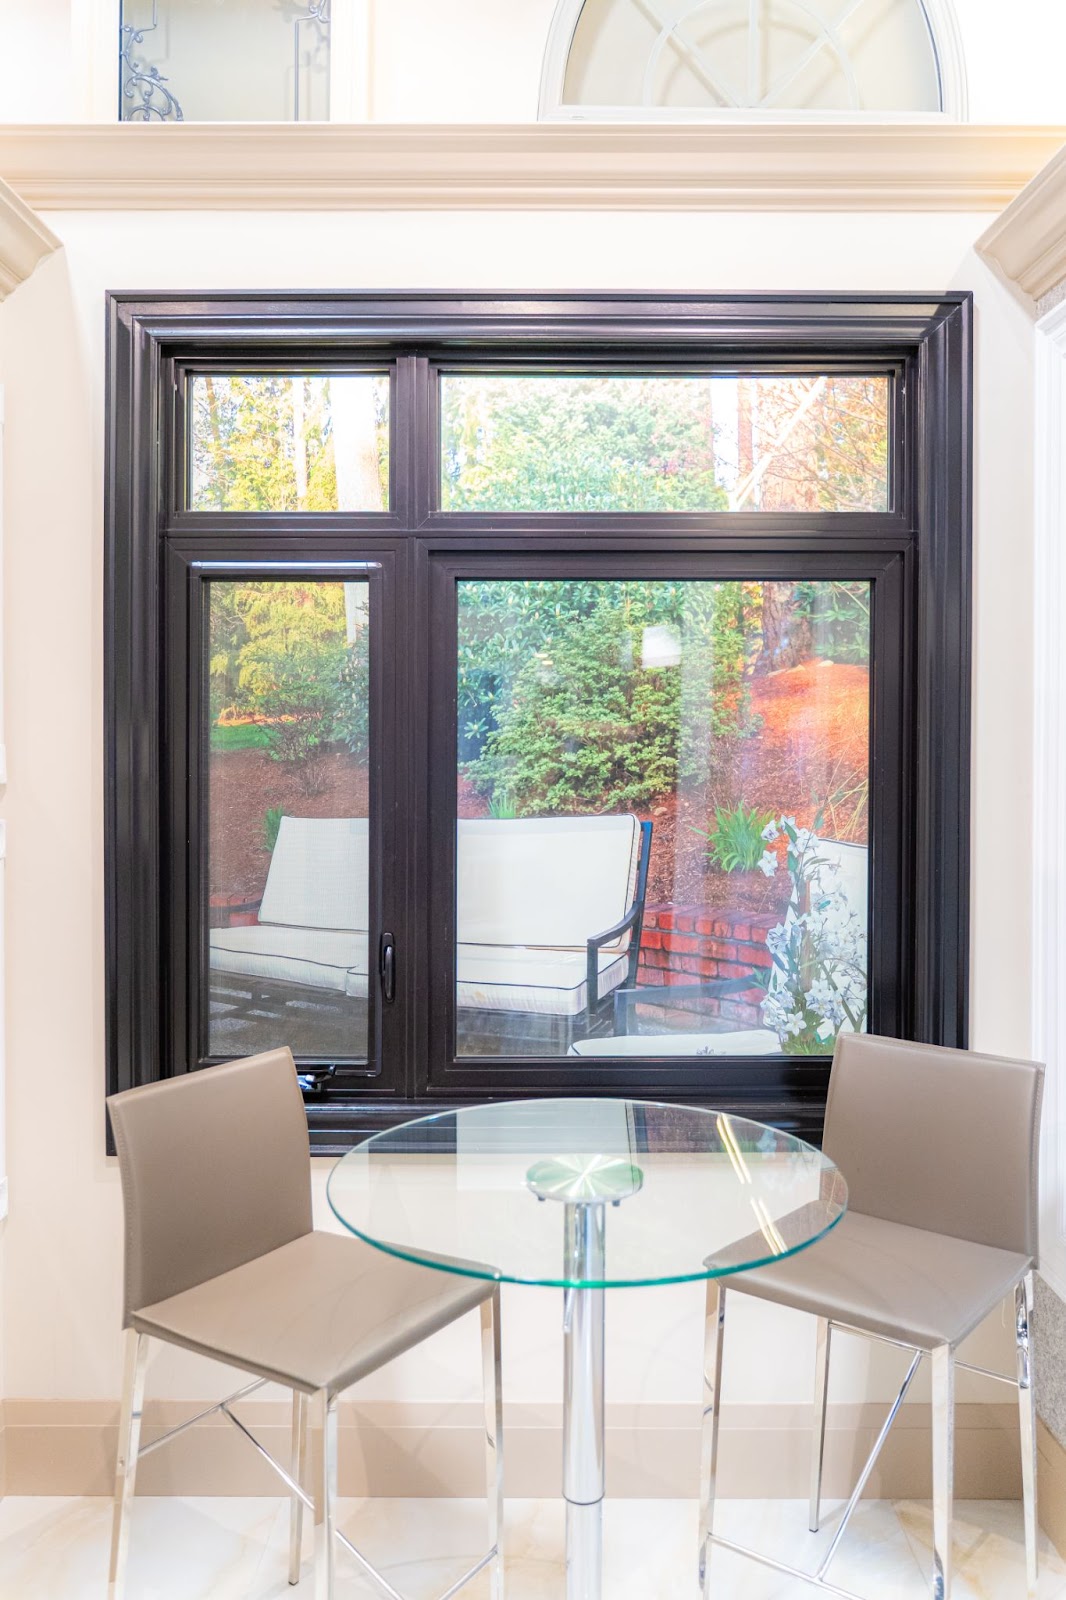 Find high-quality windows at Total Home Windows & Doors, Unit 33, 167, 76